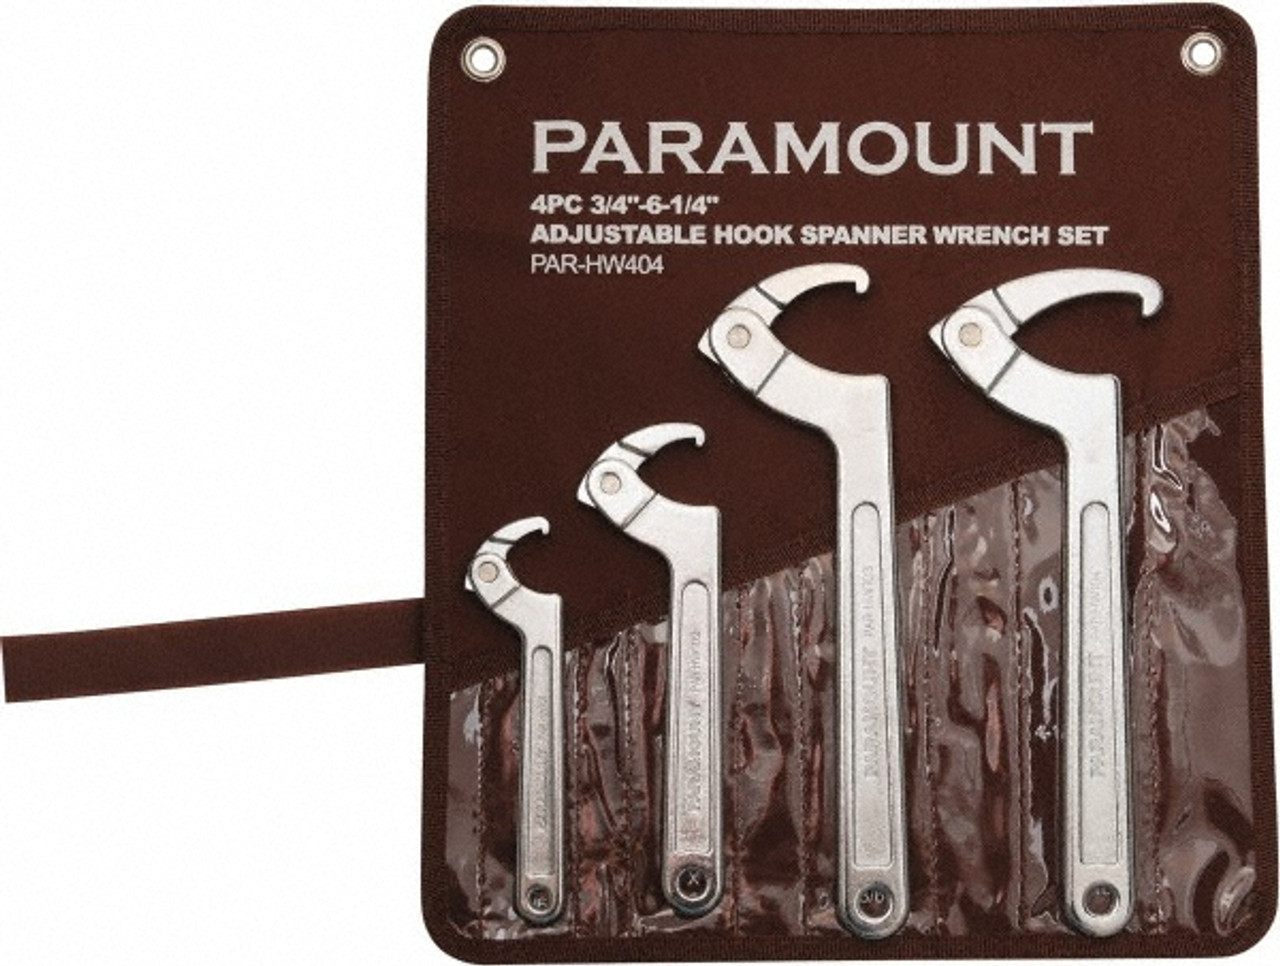 Paramount HW404 Adjustable Hook Spanner Wrench Set, 3/4 to 6-1/4 capacity  - 992-639-5 - Penn Tool Co., Inc